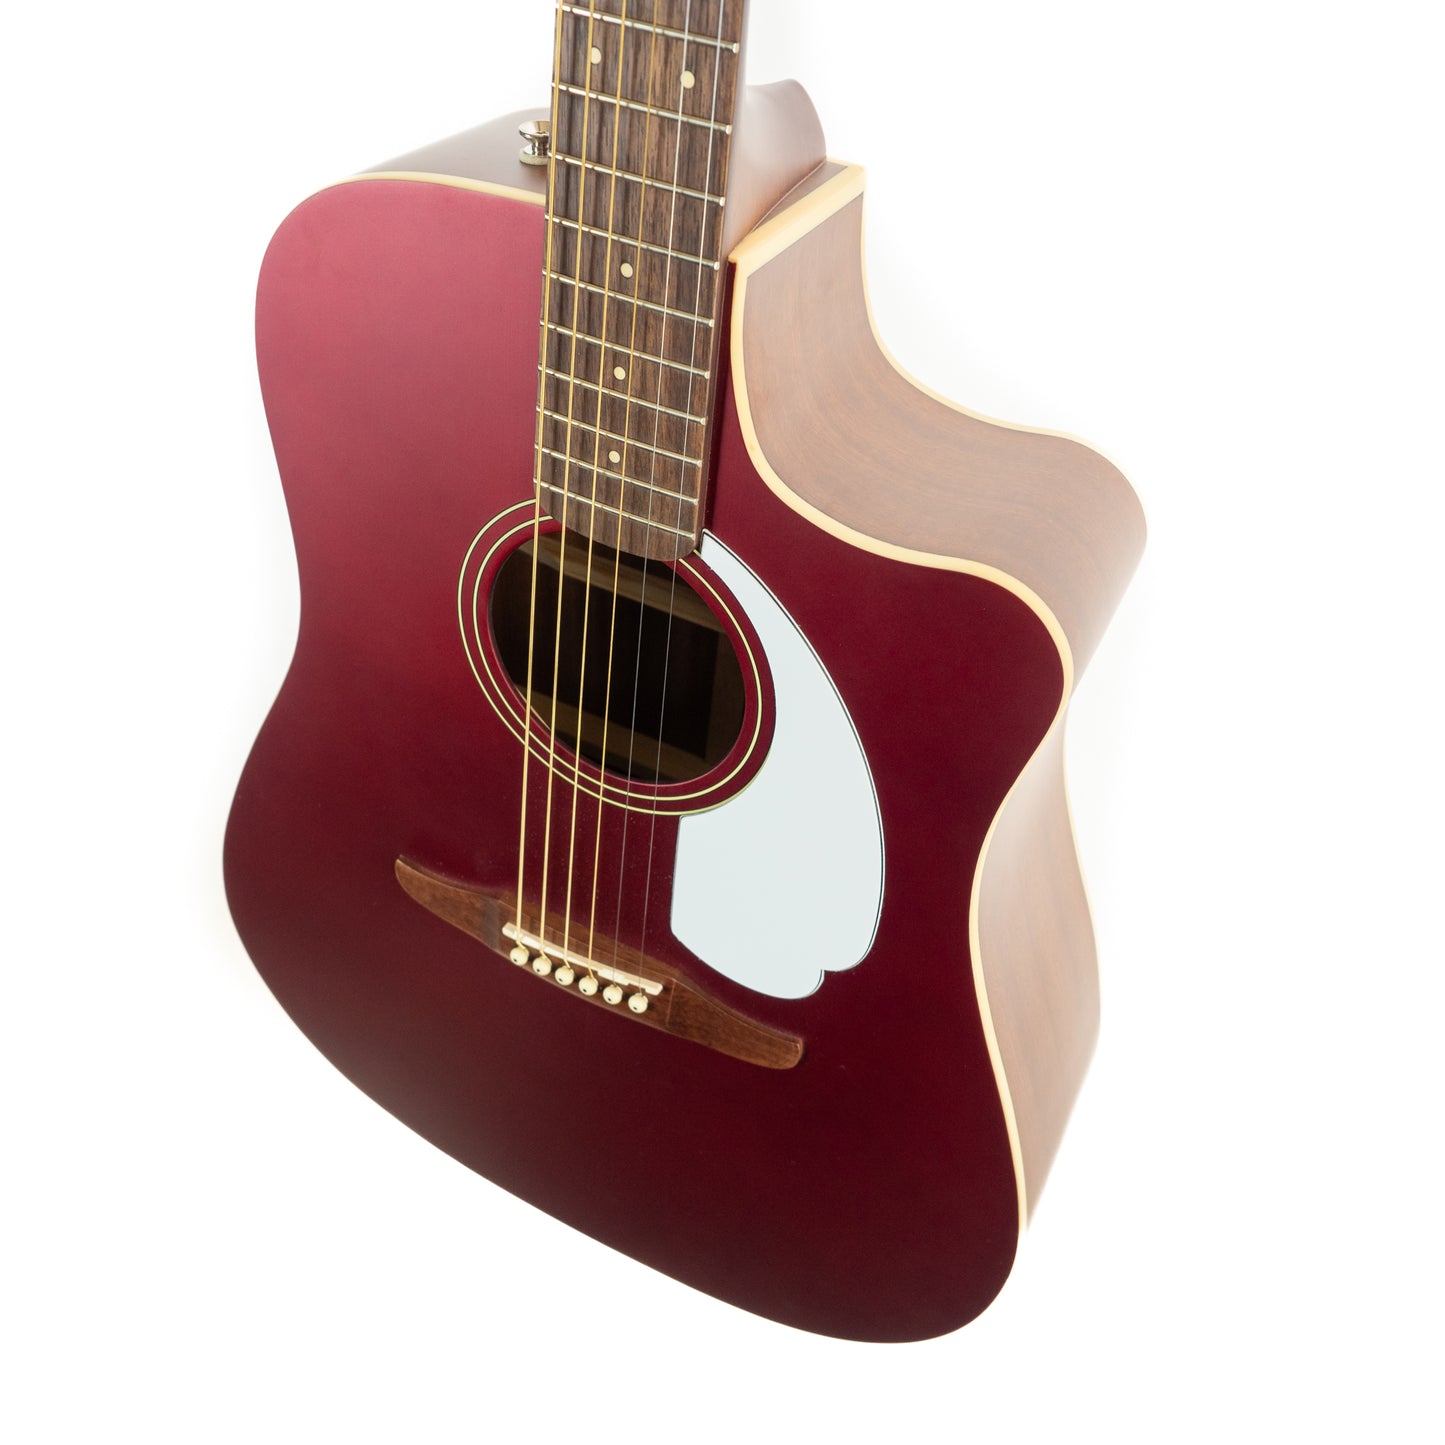 Fender Redondo Player, candy apple red satin cutaway electric dreadnought guitar